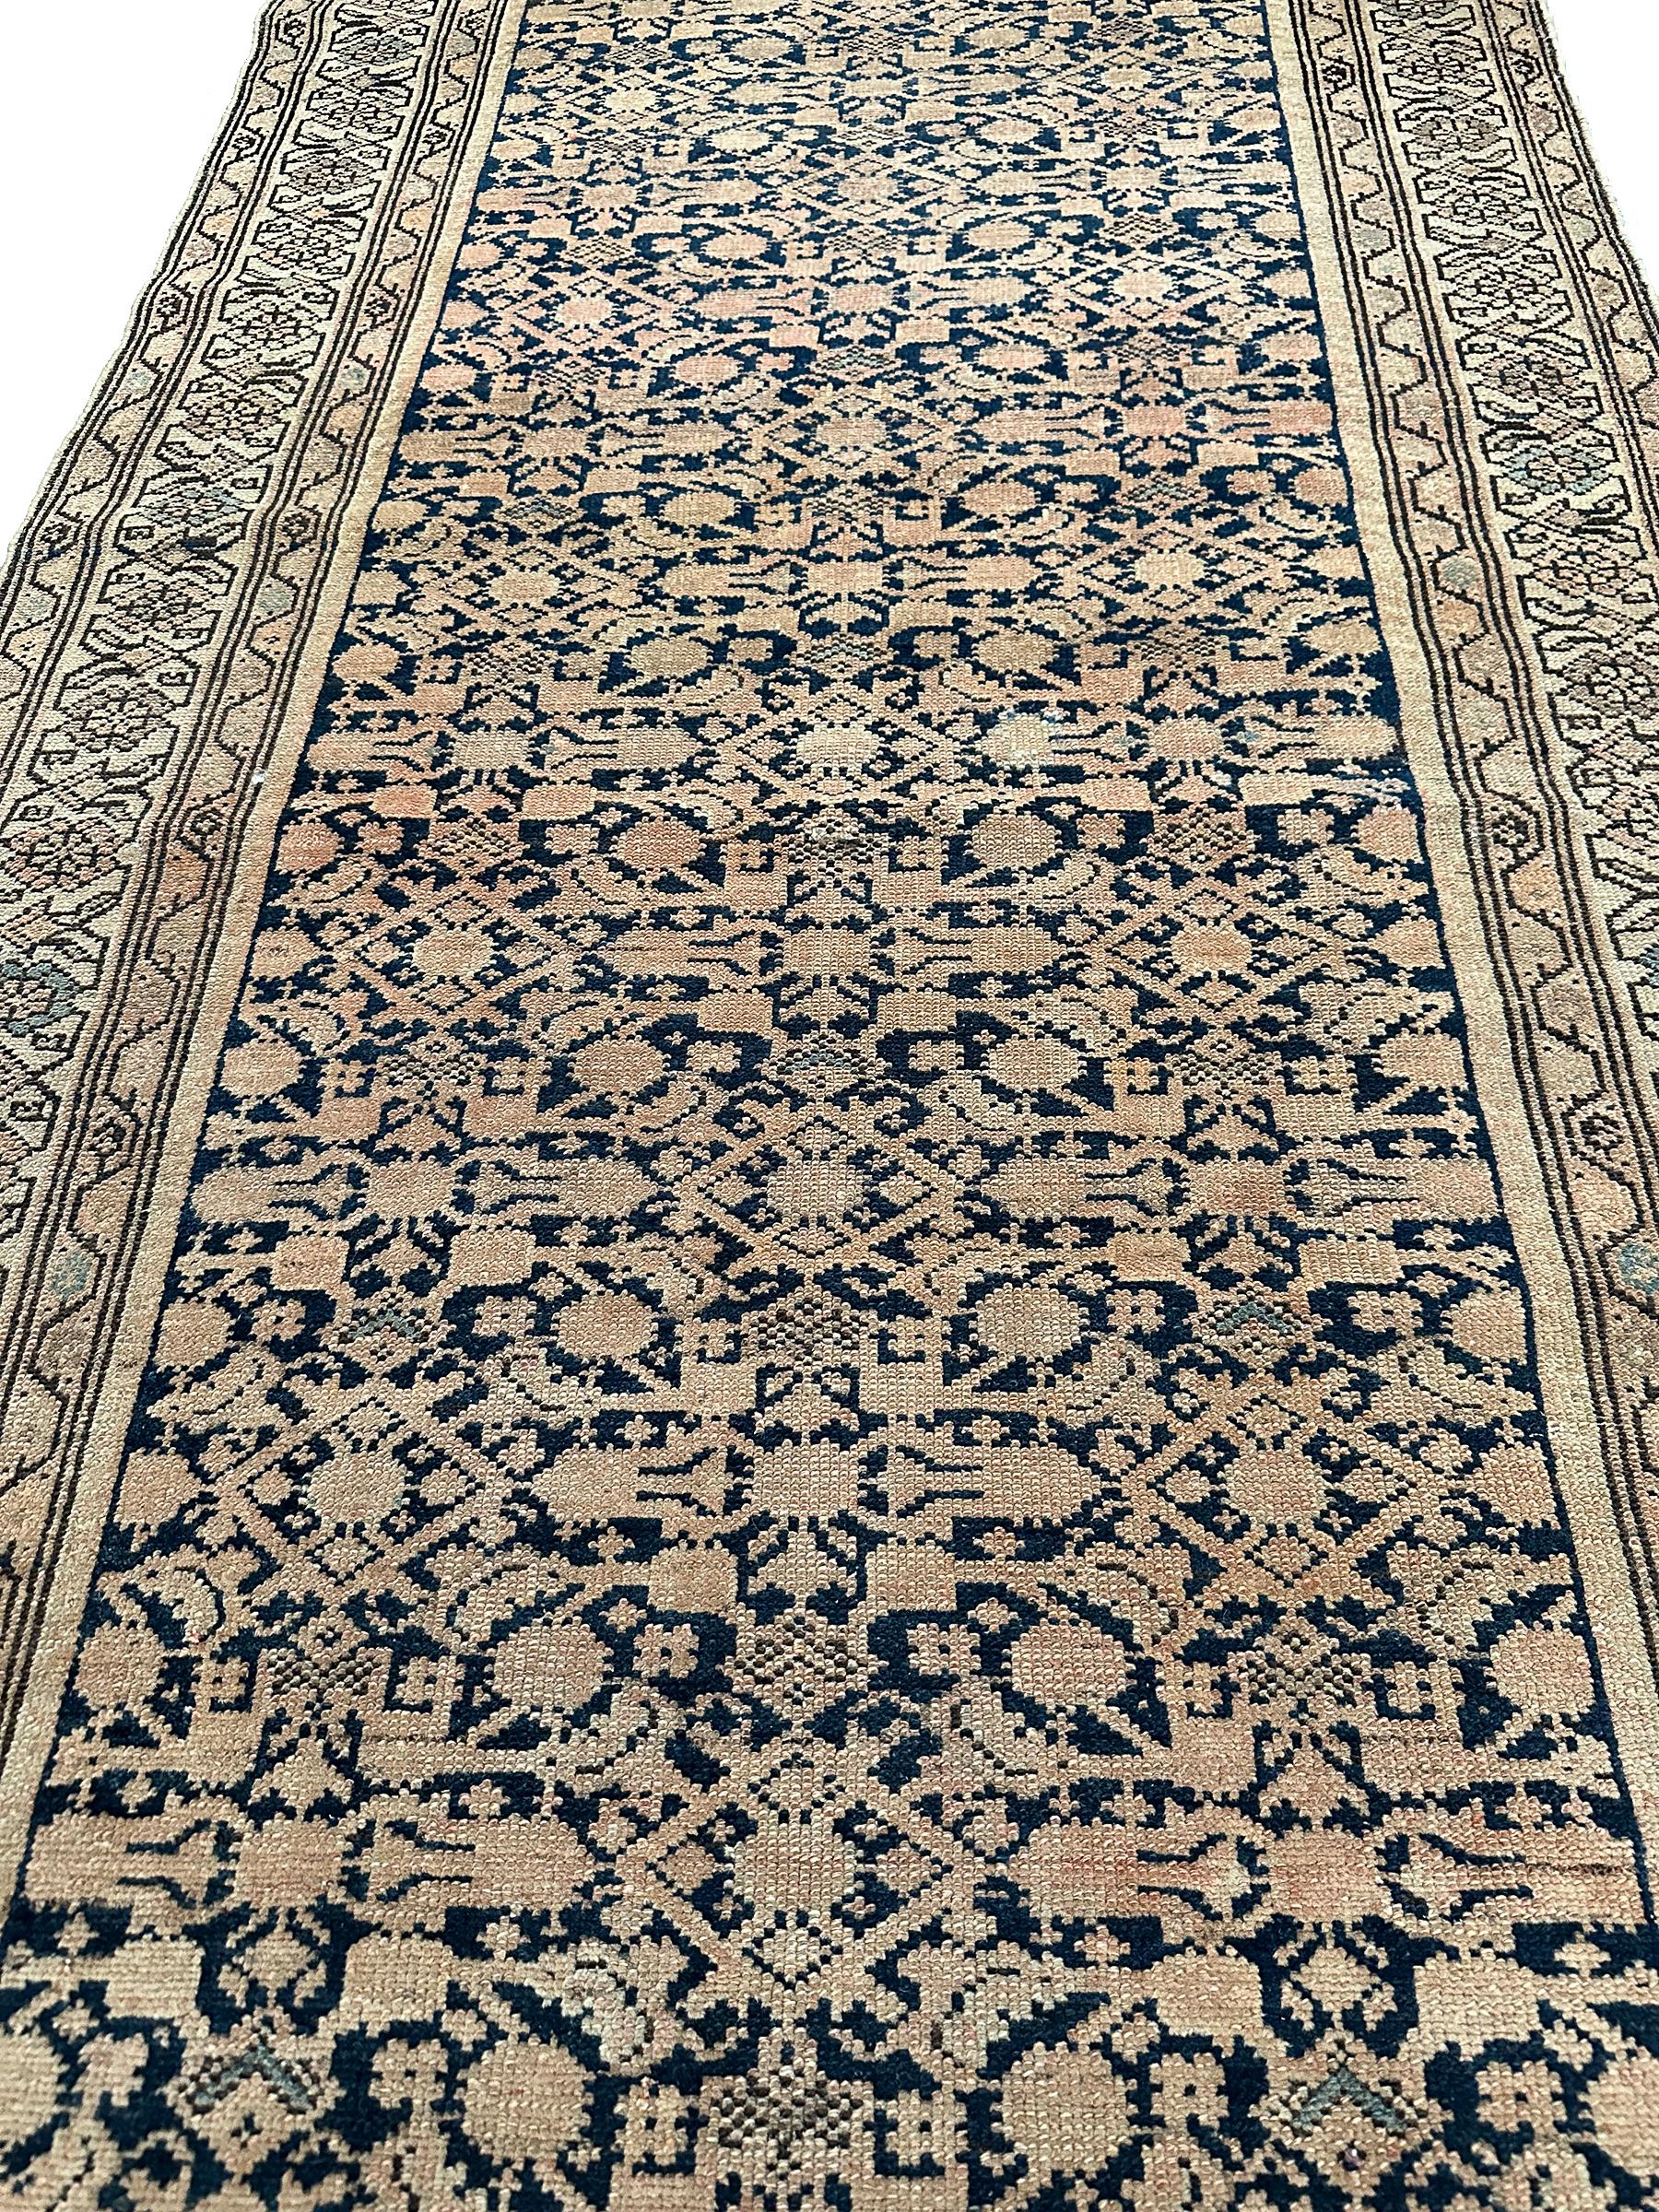 Late 19th Century Antique Persian Runner Antique Persian Malayer Runner 1890 4x10ft  For Sale